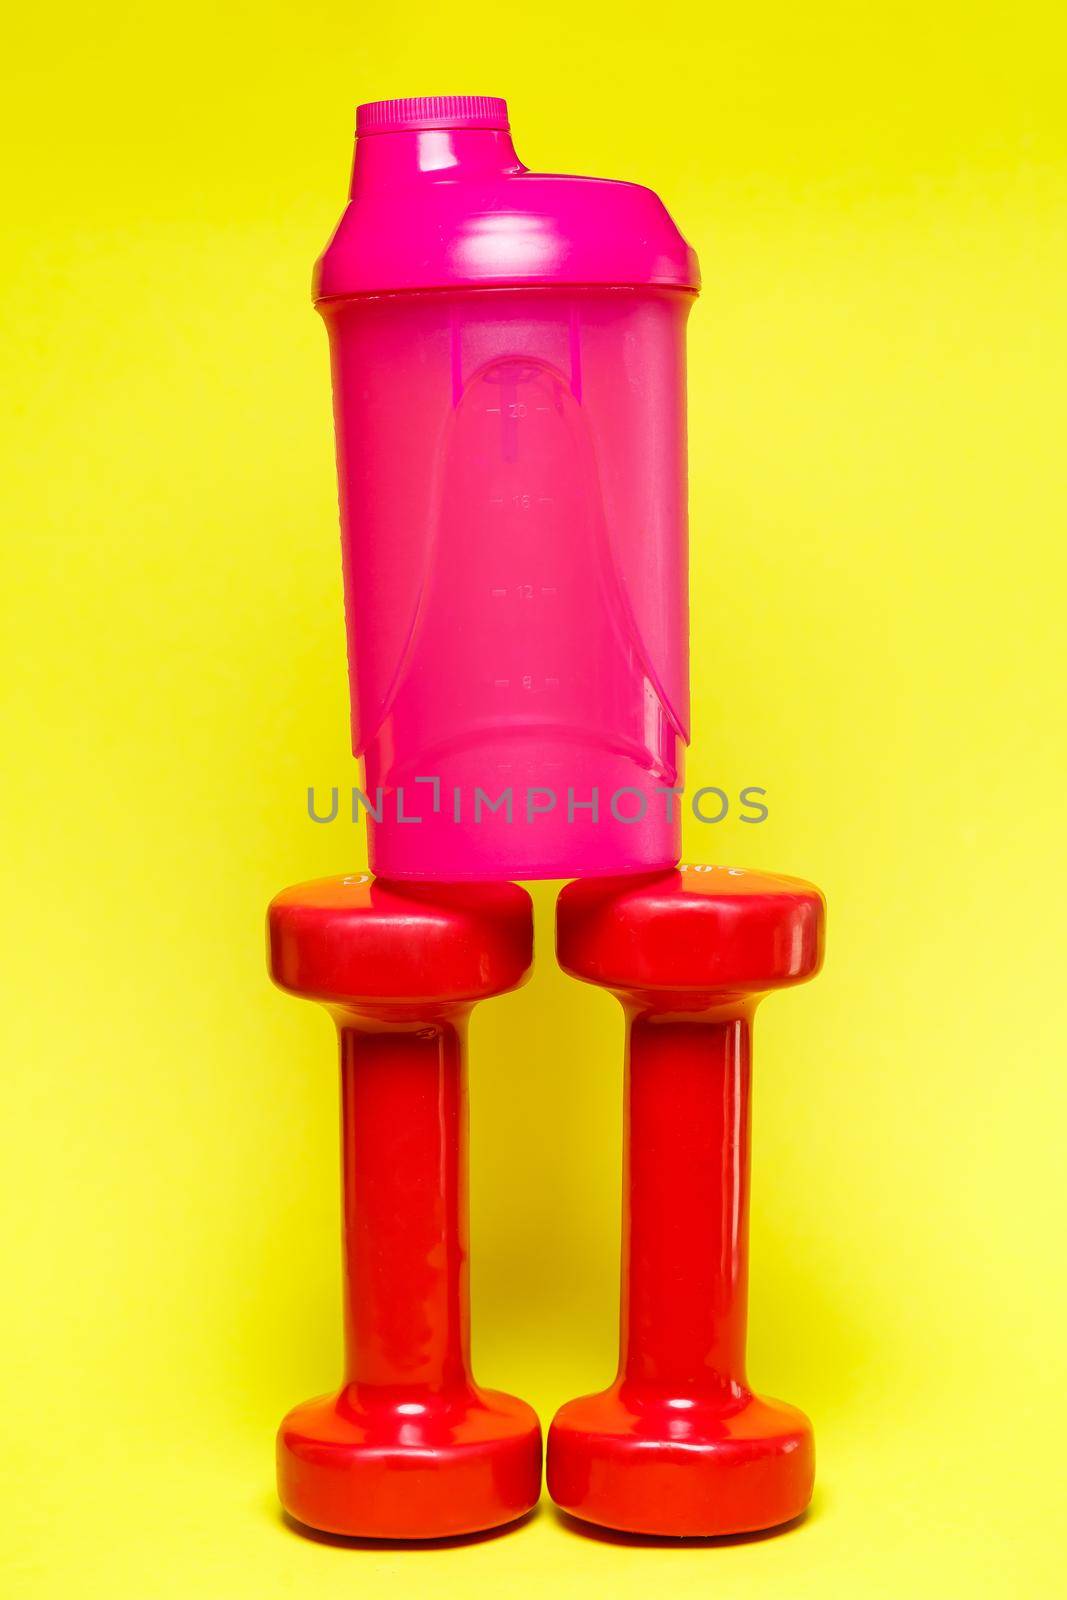 red dumbbells, pink shaker, colored background, sports, energy drink, gym equipment